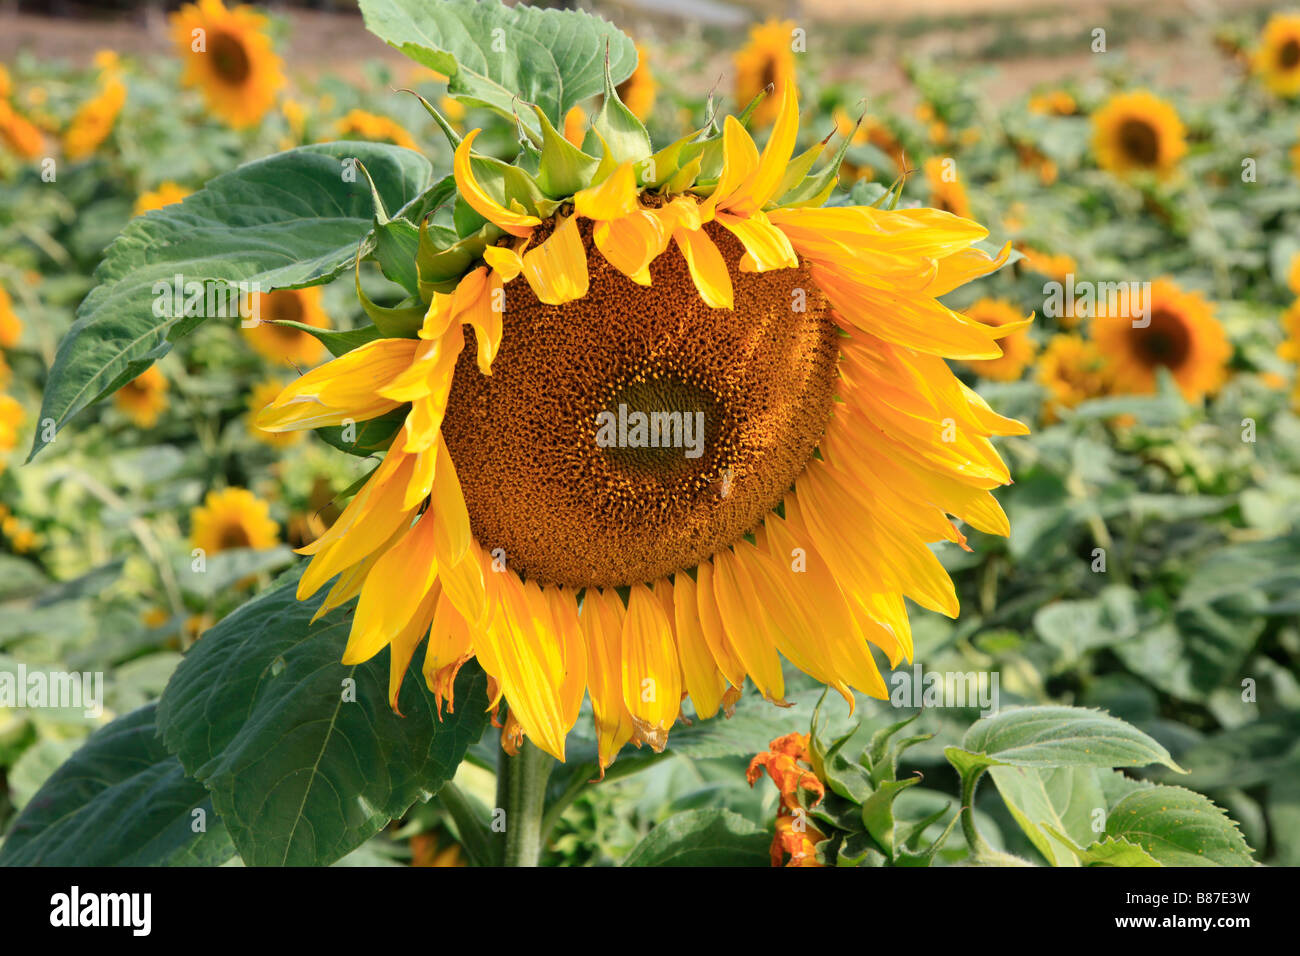 Close up of sunflower head in field Stock Photo